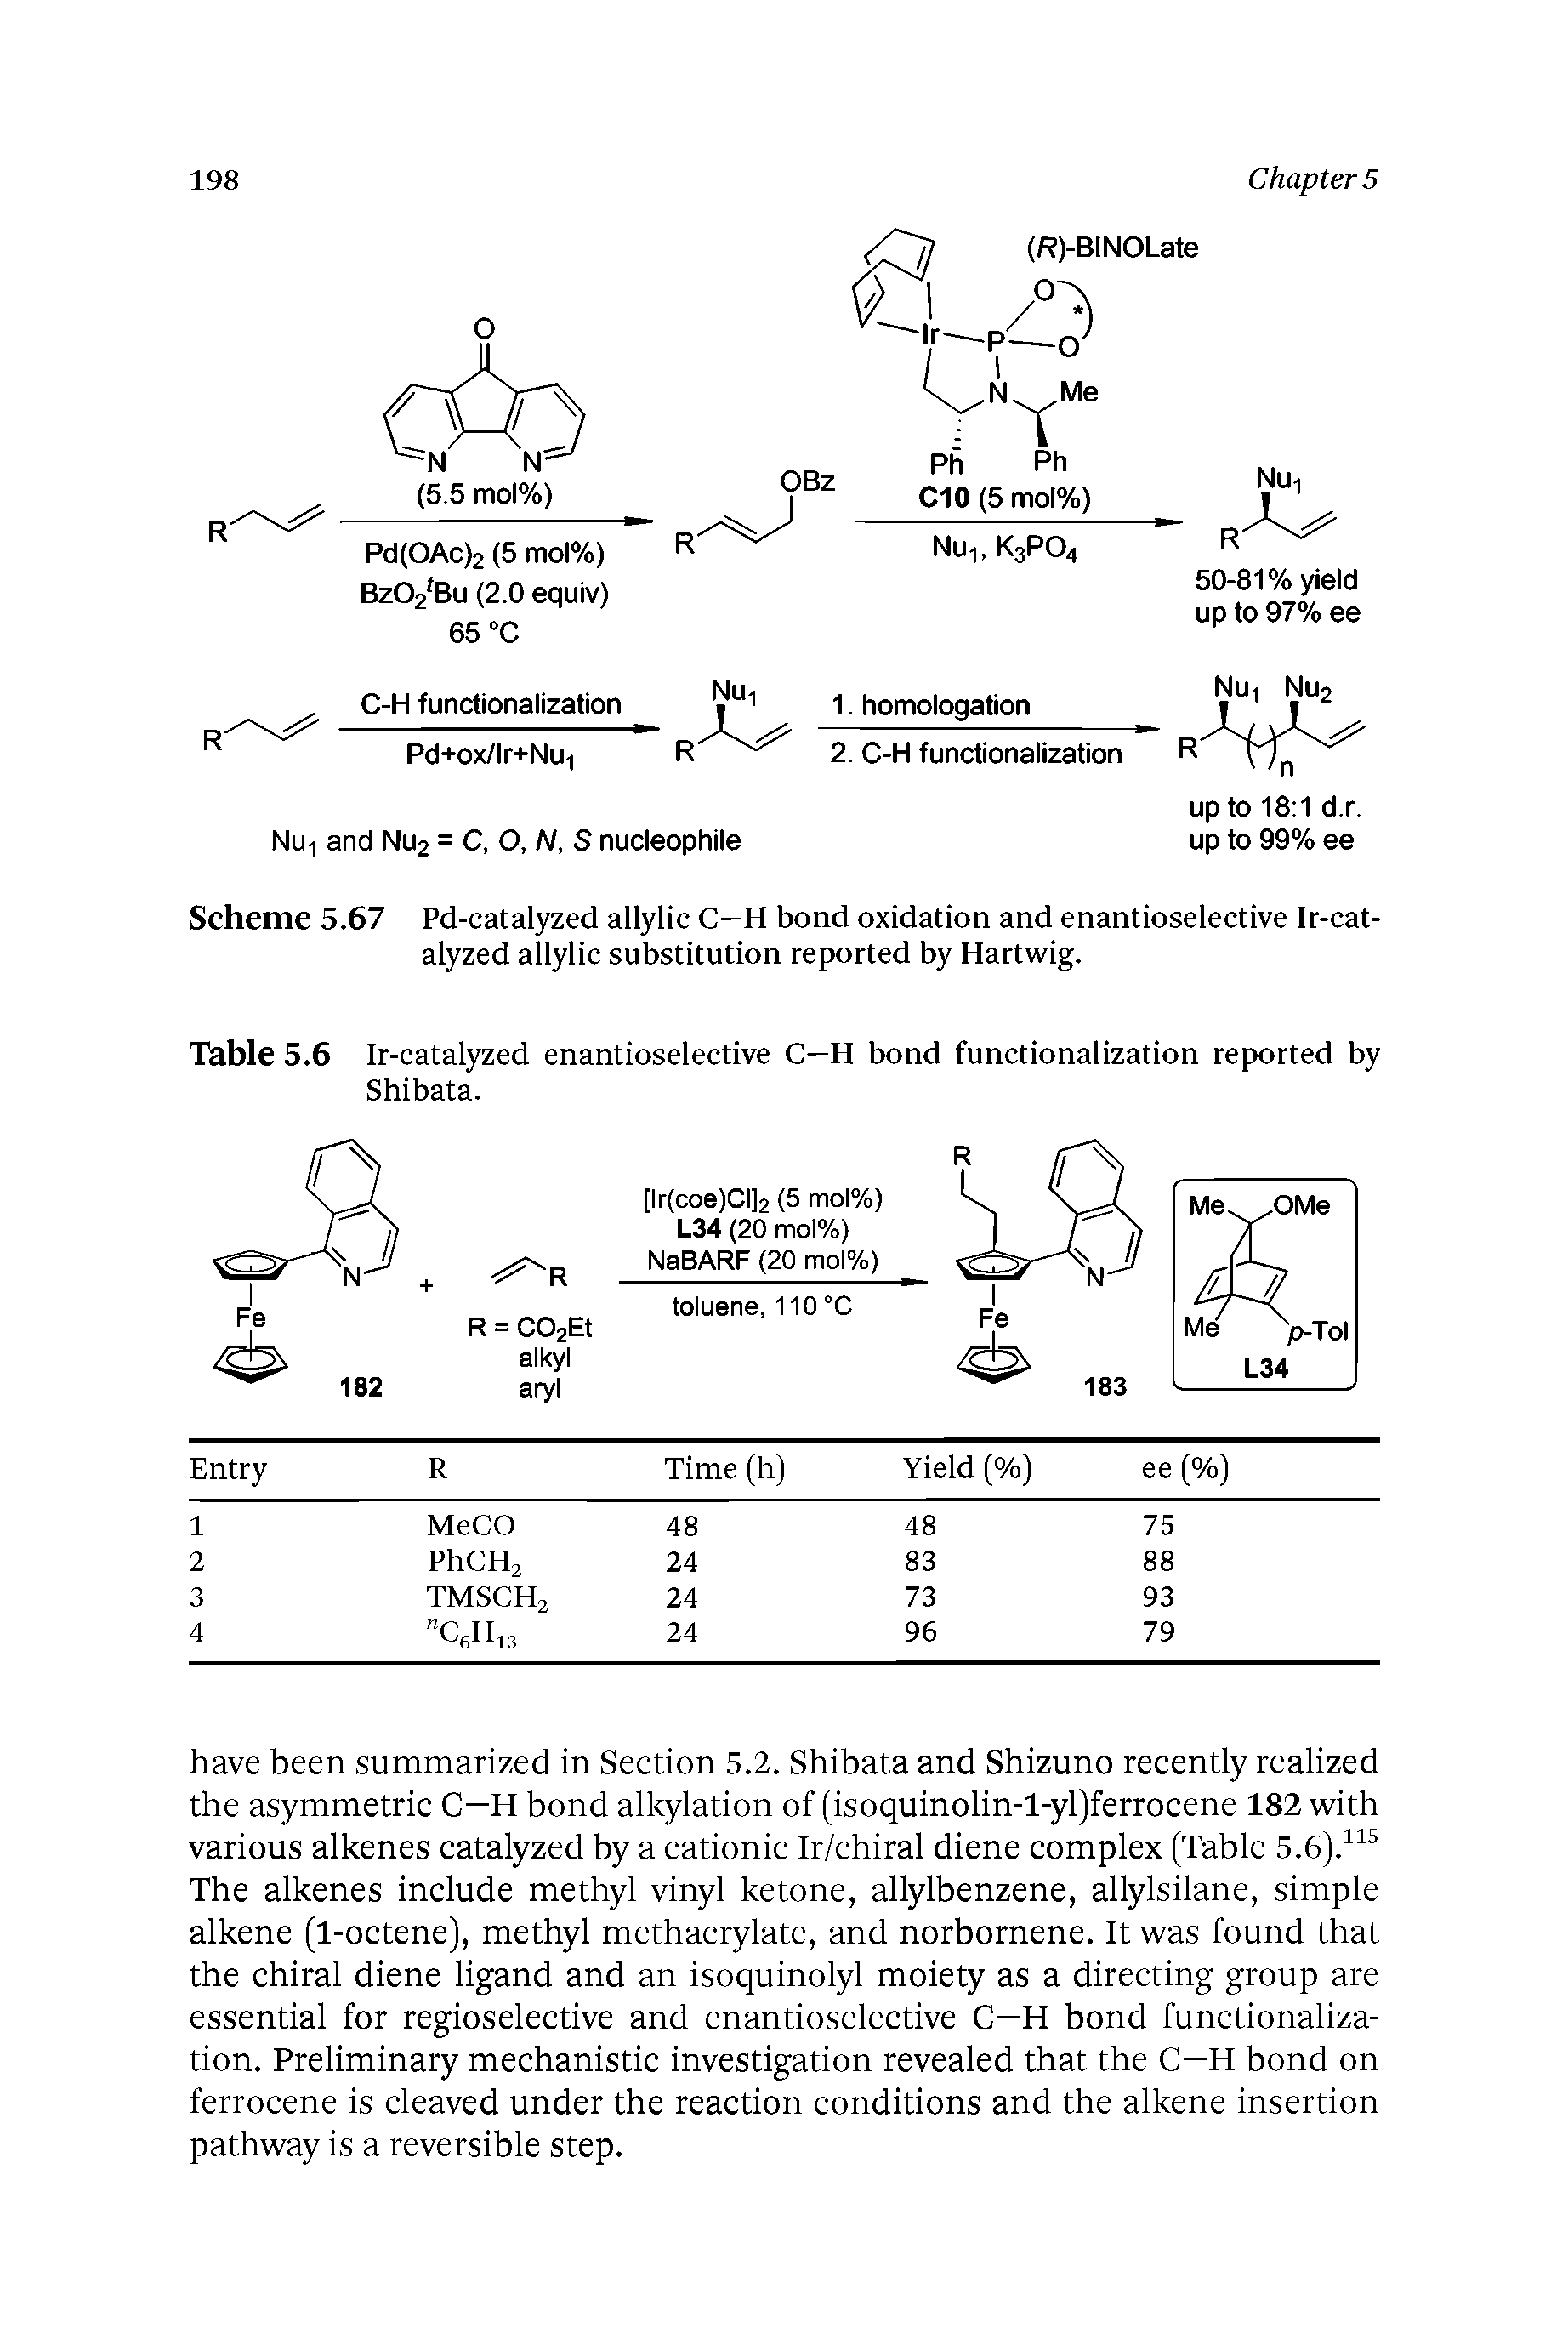 Scheme 5.67 Pd-catalyzed allylic C—H bond oxidation and enantioselective Ir-cat-alyzed allylic substitution reported by Hartwig.